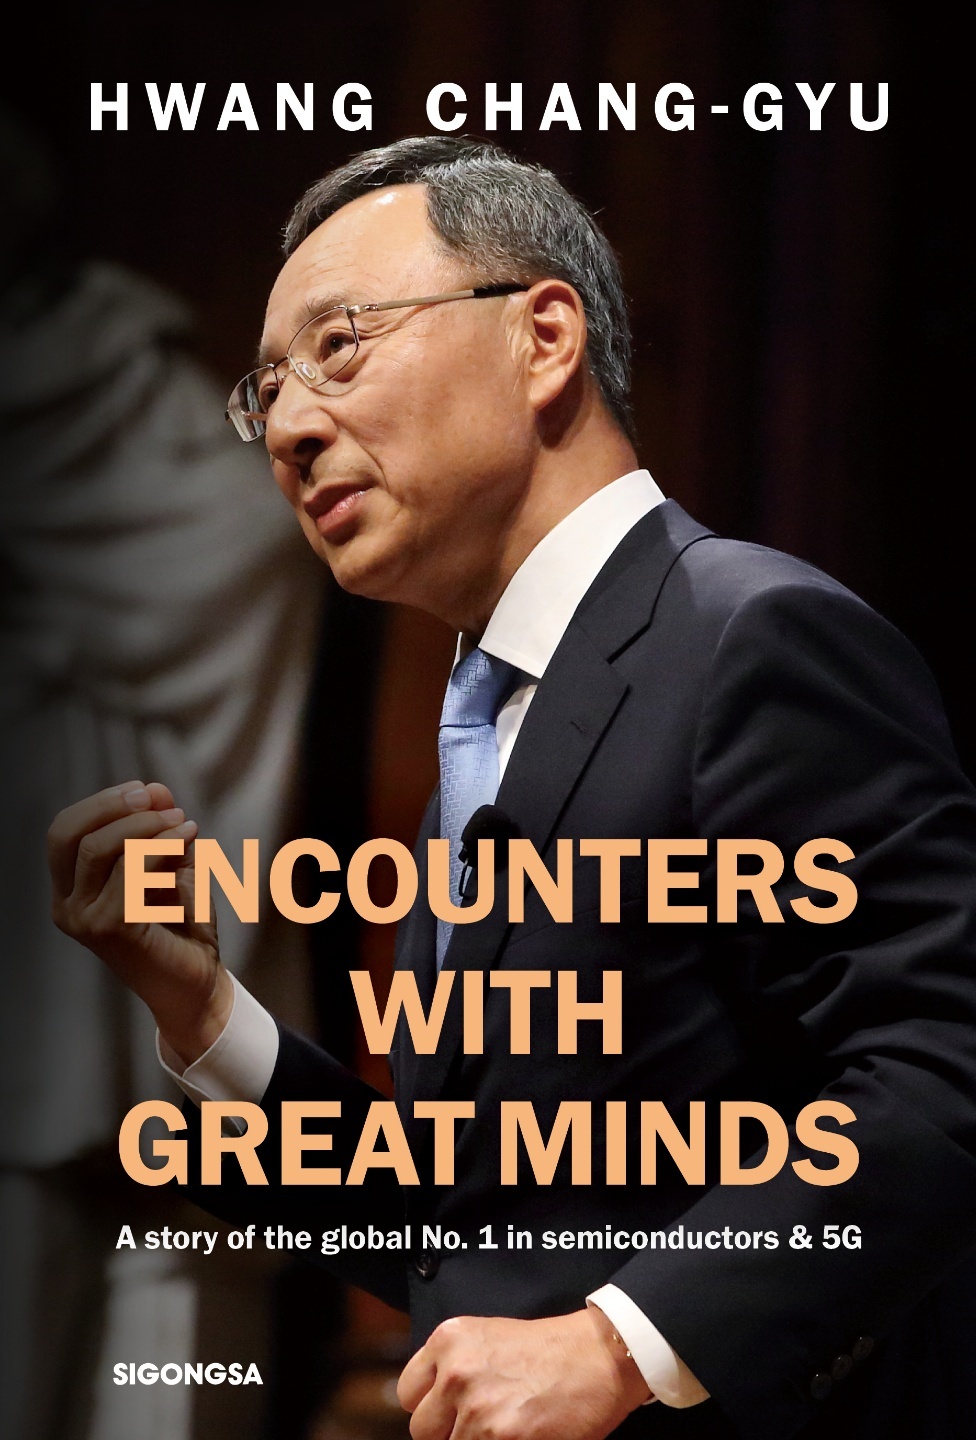 A cover of “Encounters with Great Minds” (Sigongsa)